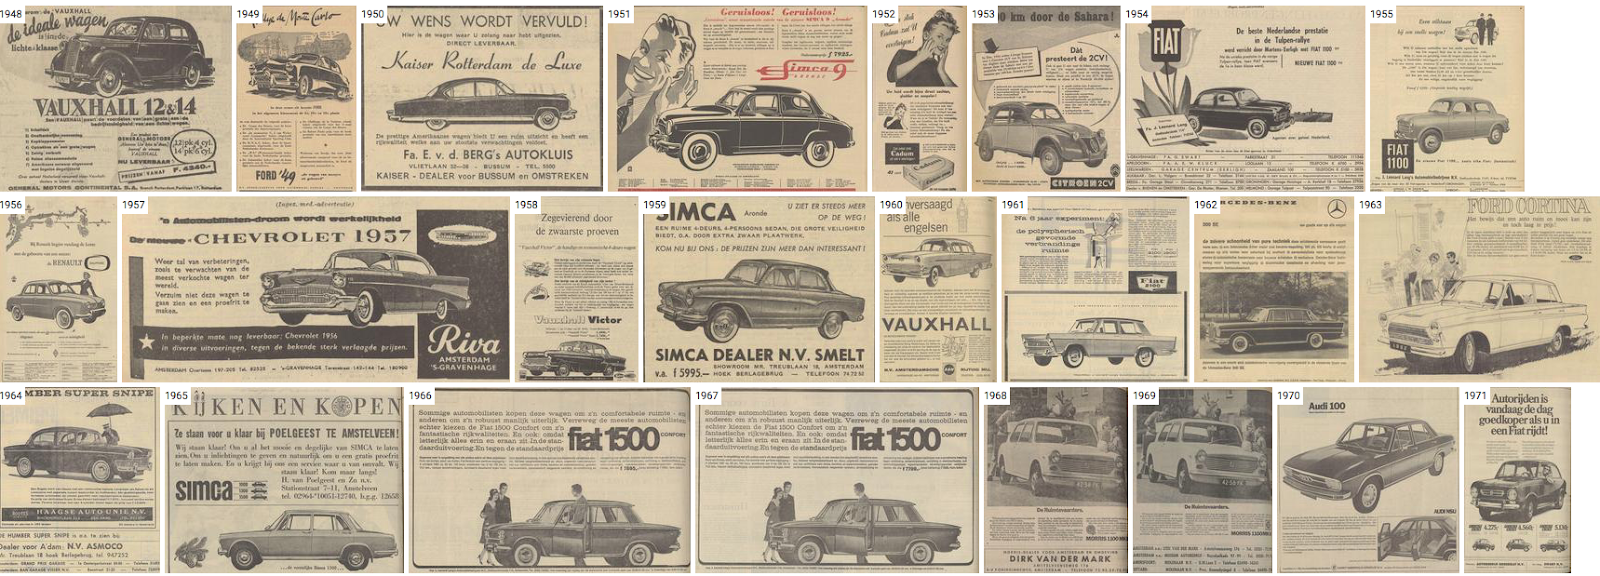 Figure 2. SIAMESE timeline view for automobile advertisements